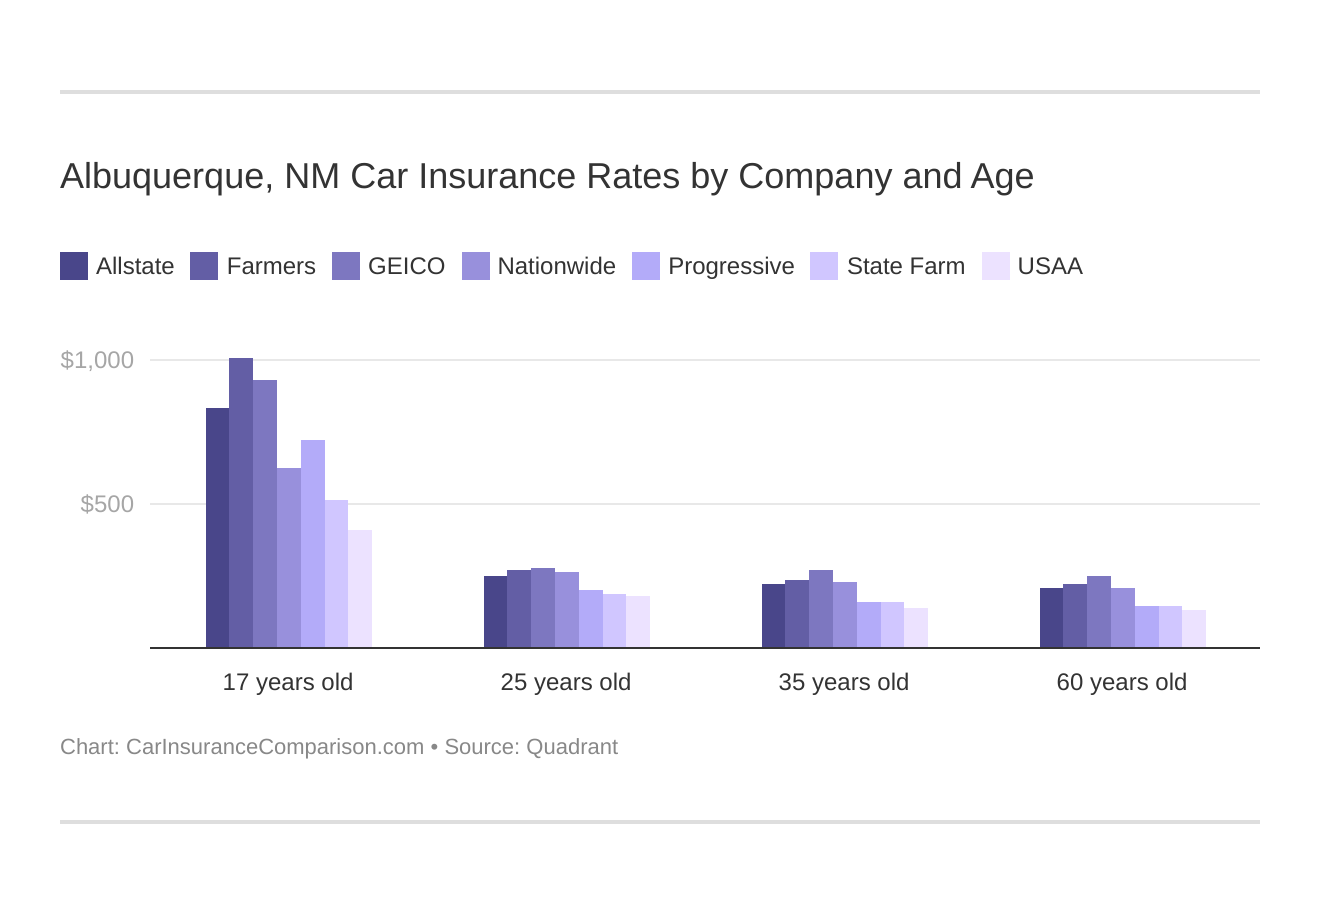 Albuquerque, NM Car Insurance Rates by Company and Age